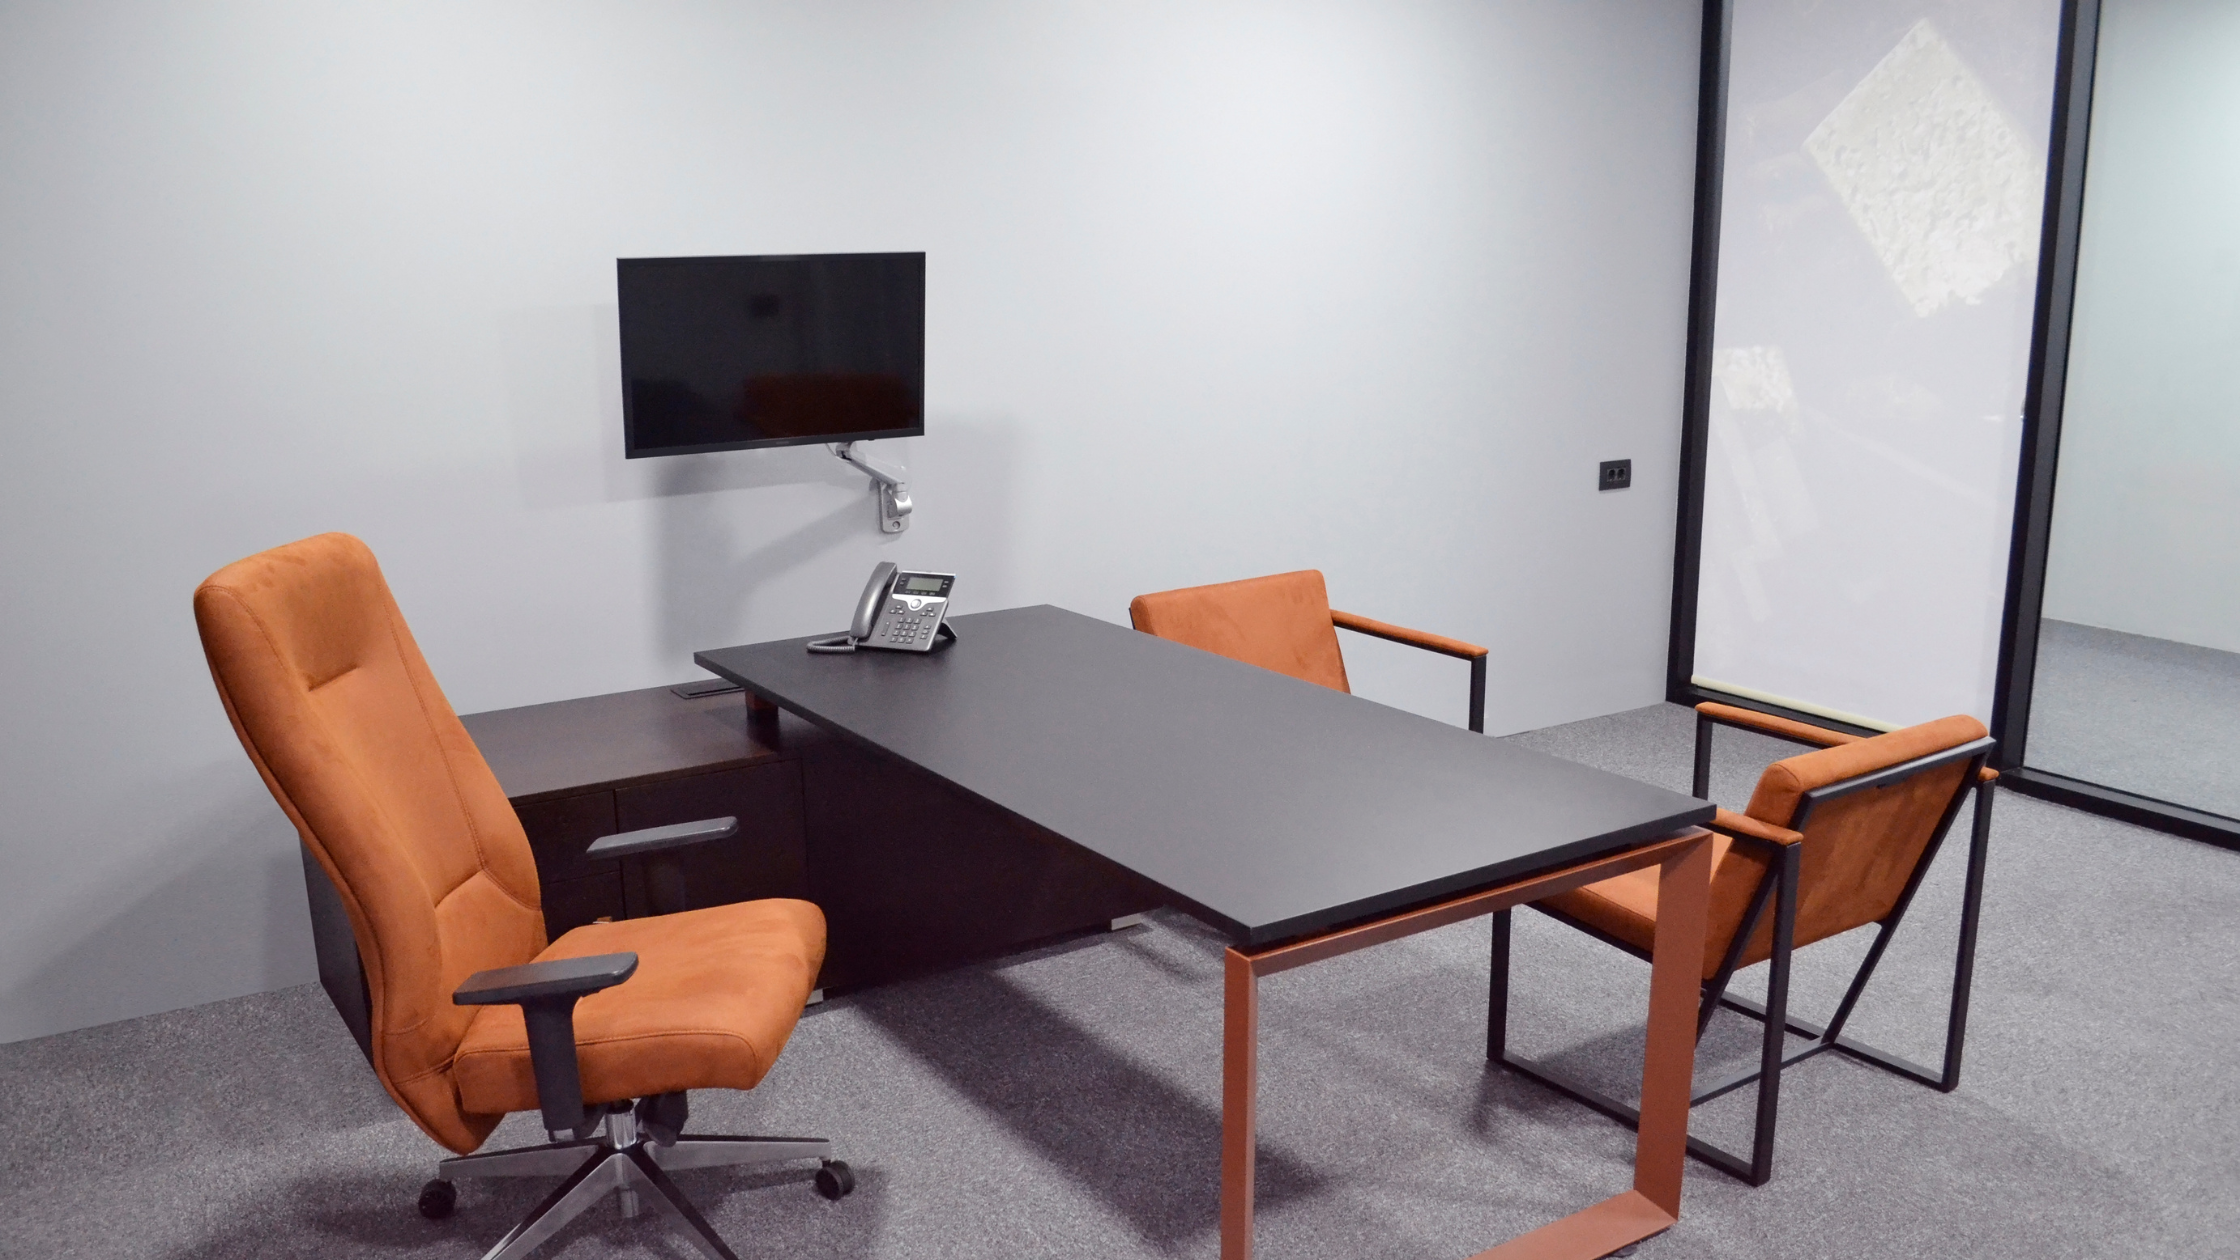 Office Desk, Chair, and Furniture in Small Conference Room